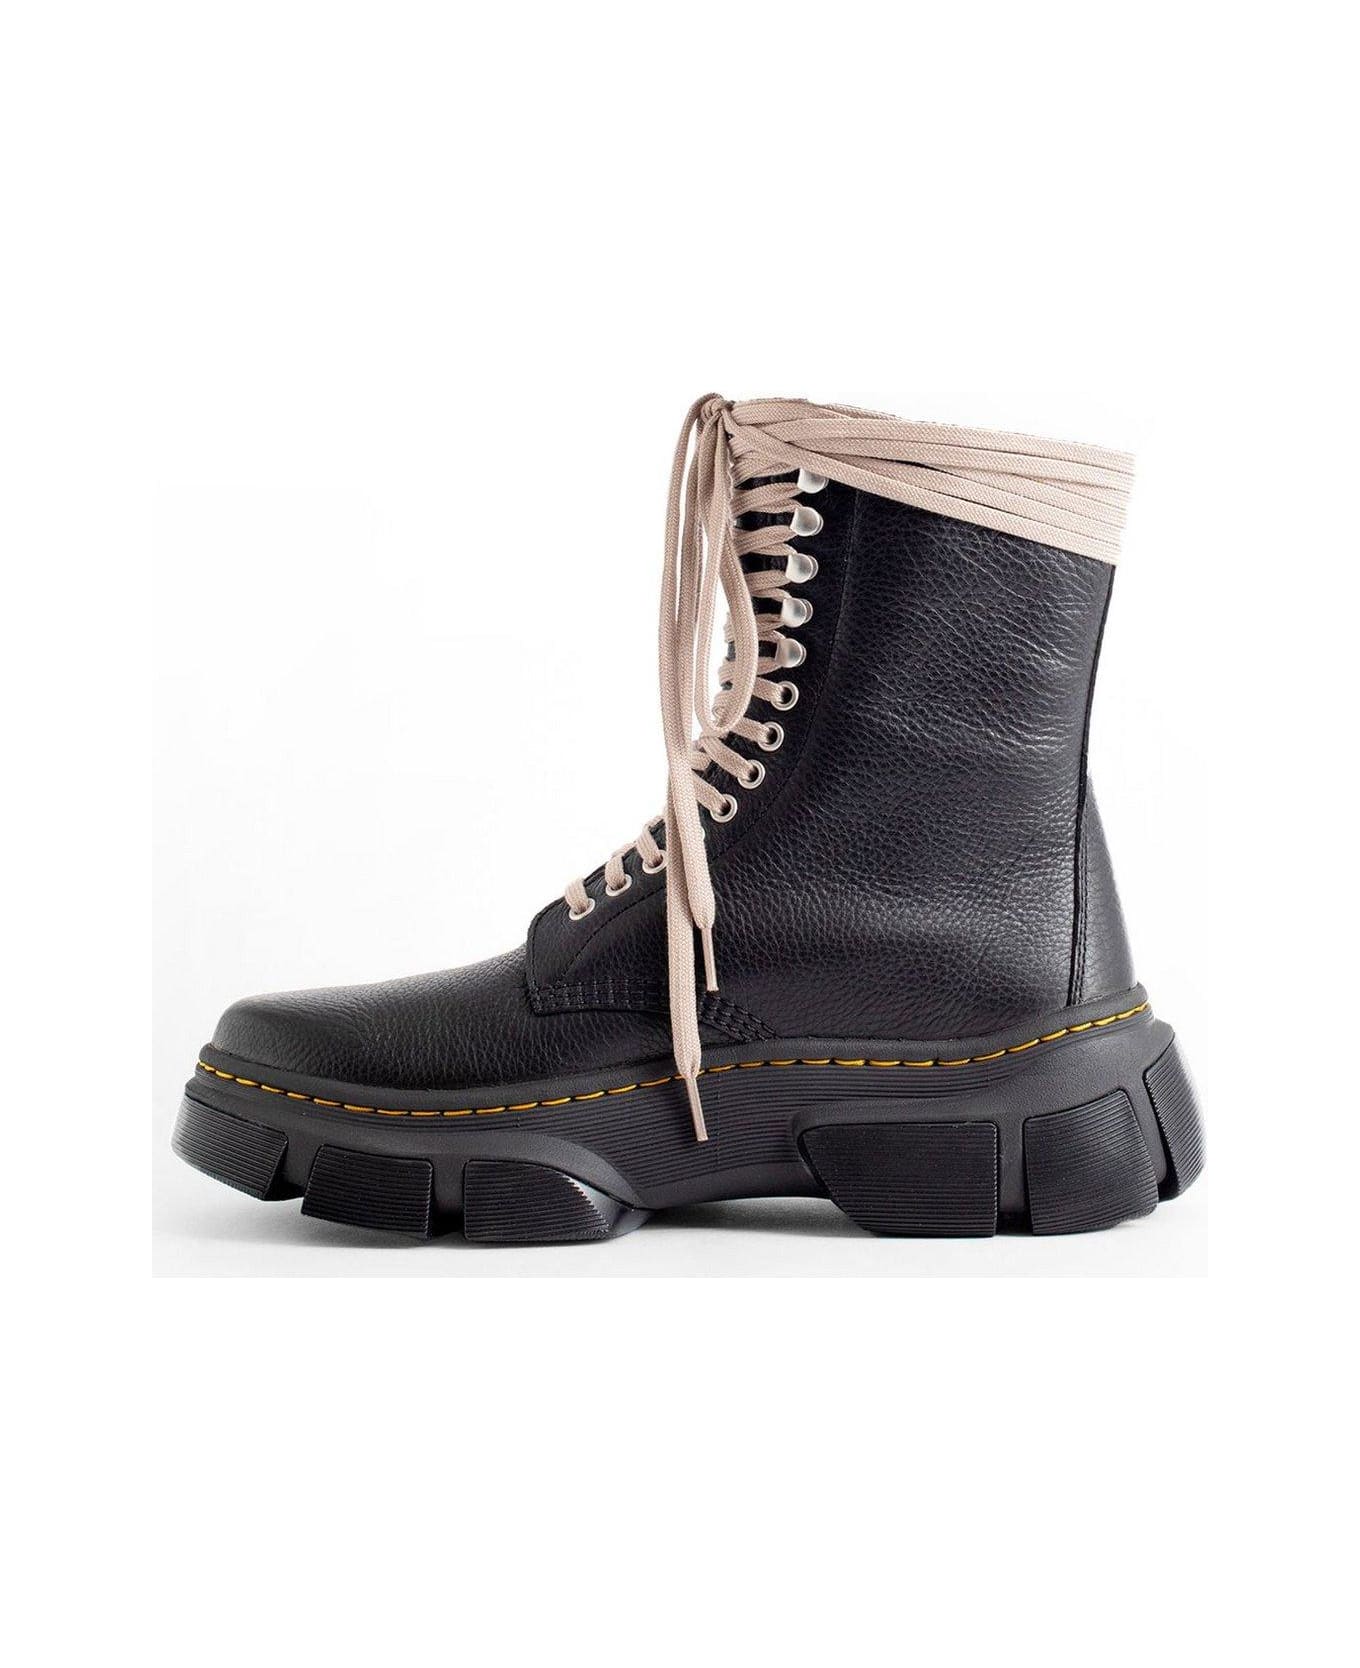 Rick Owens x Dr. Martens Chunky Sole Lace-up Boots - BLACK 09